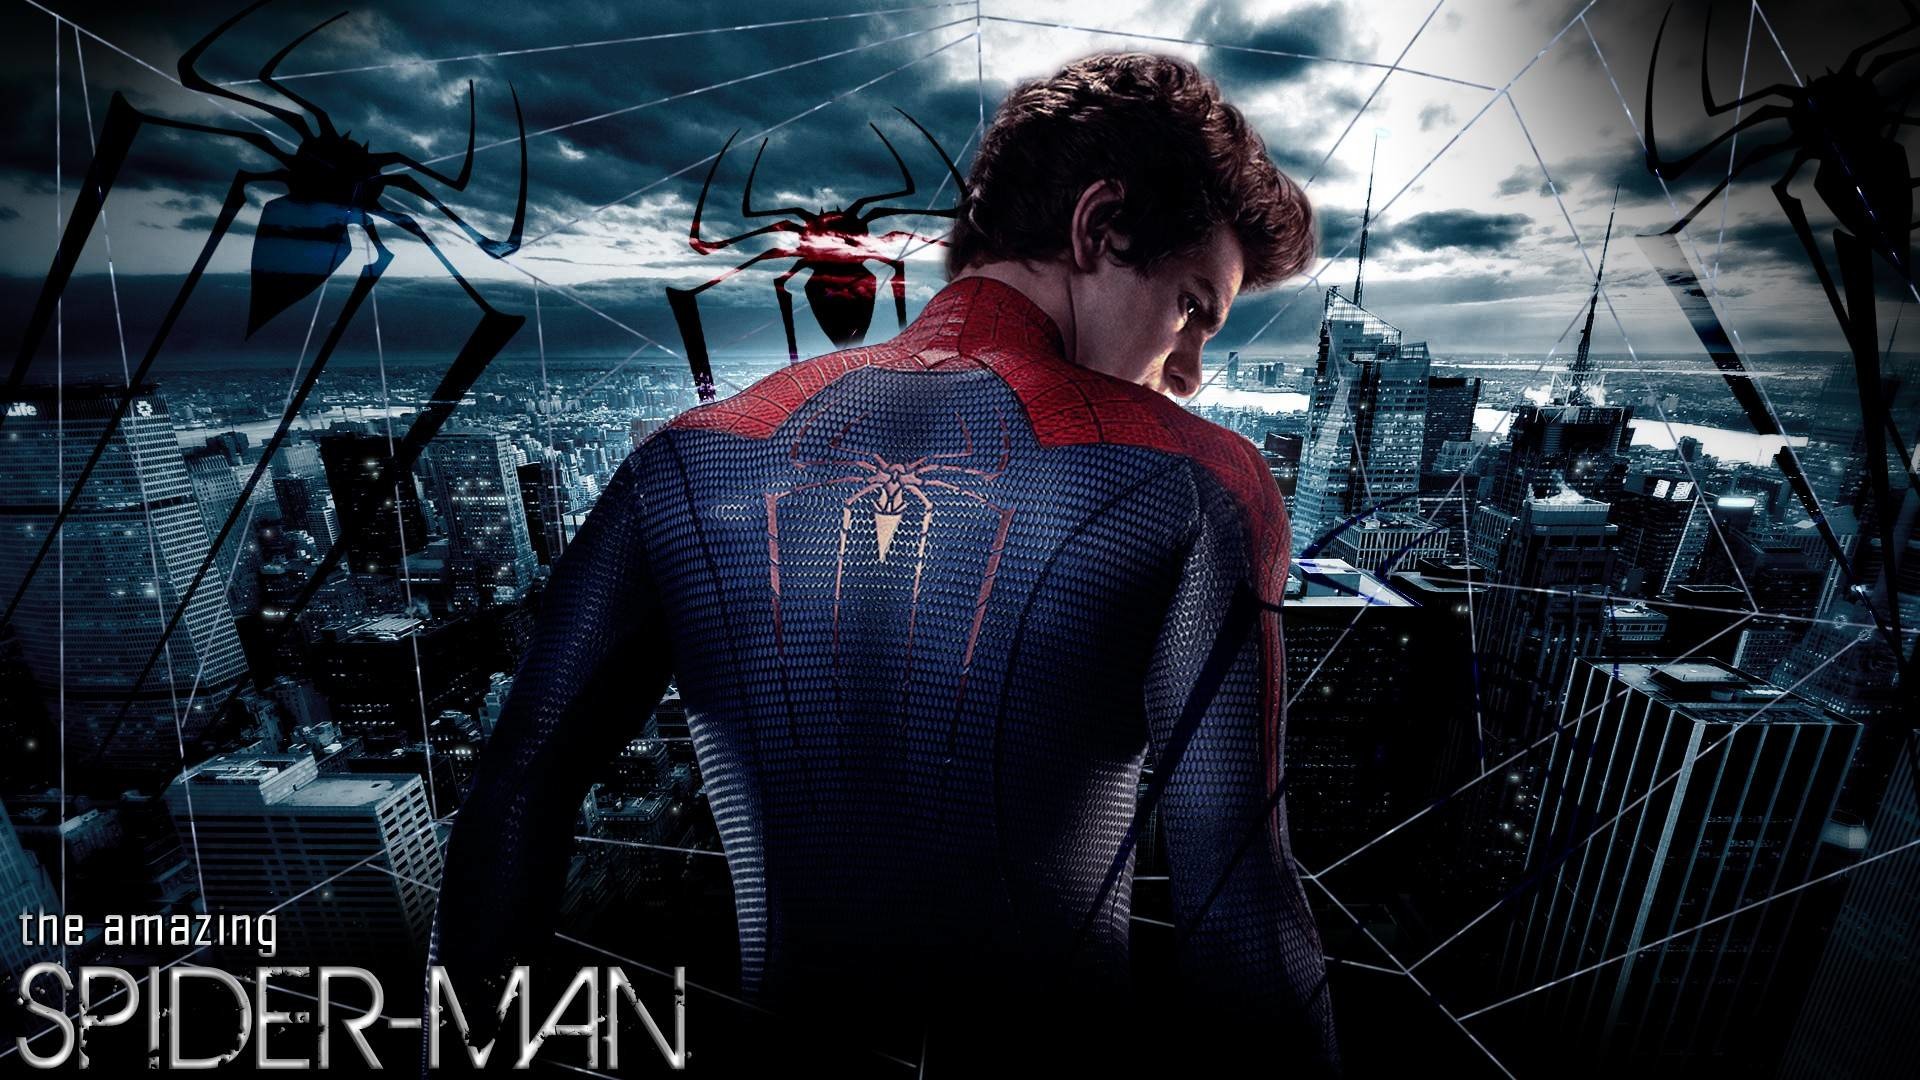 1920x1080 Download The Latest Amzing Spider HD Wallpapers From Wallpapers111 .